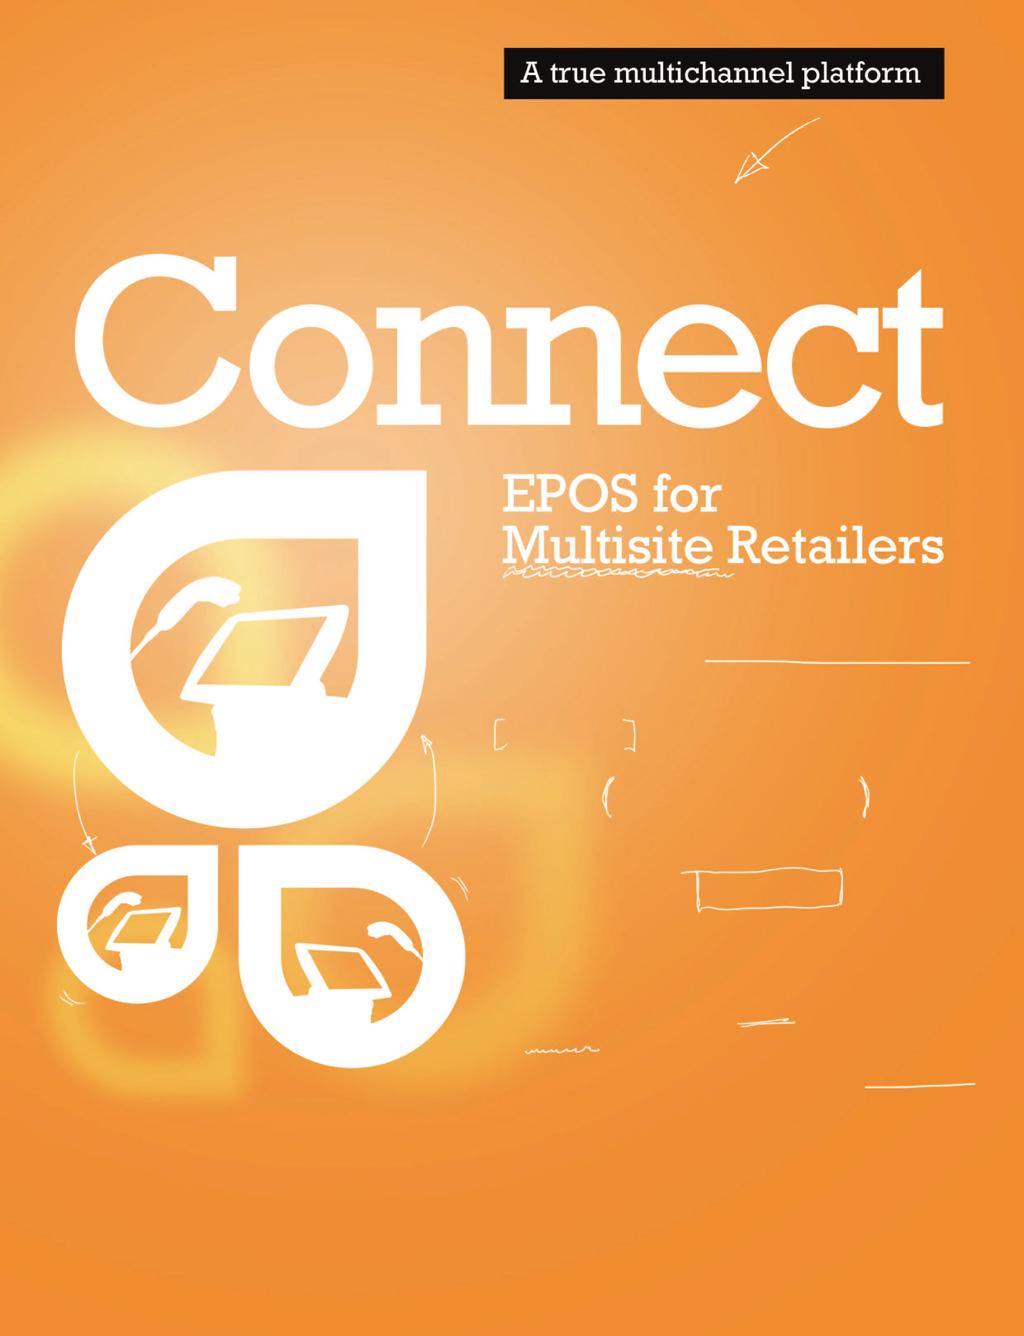 This premium EPoS solution provides the ideal platform for the modern multisite retail business.